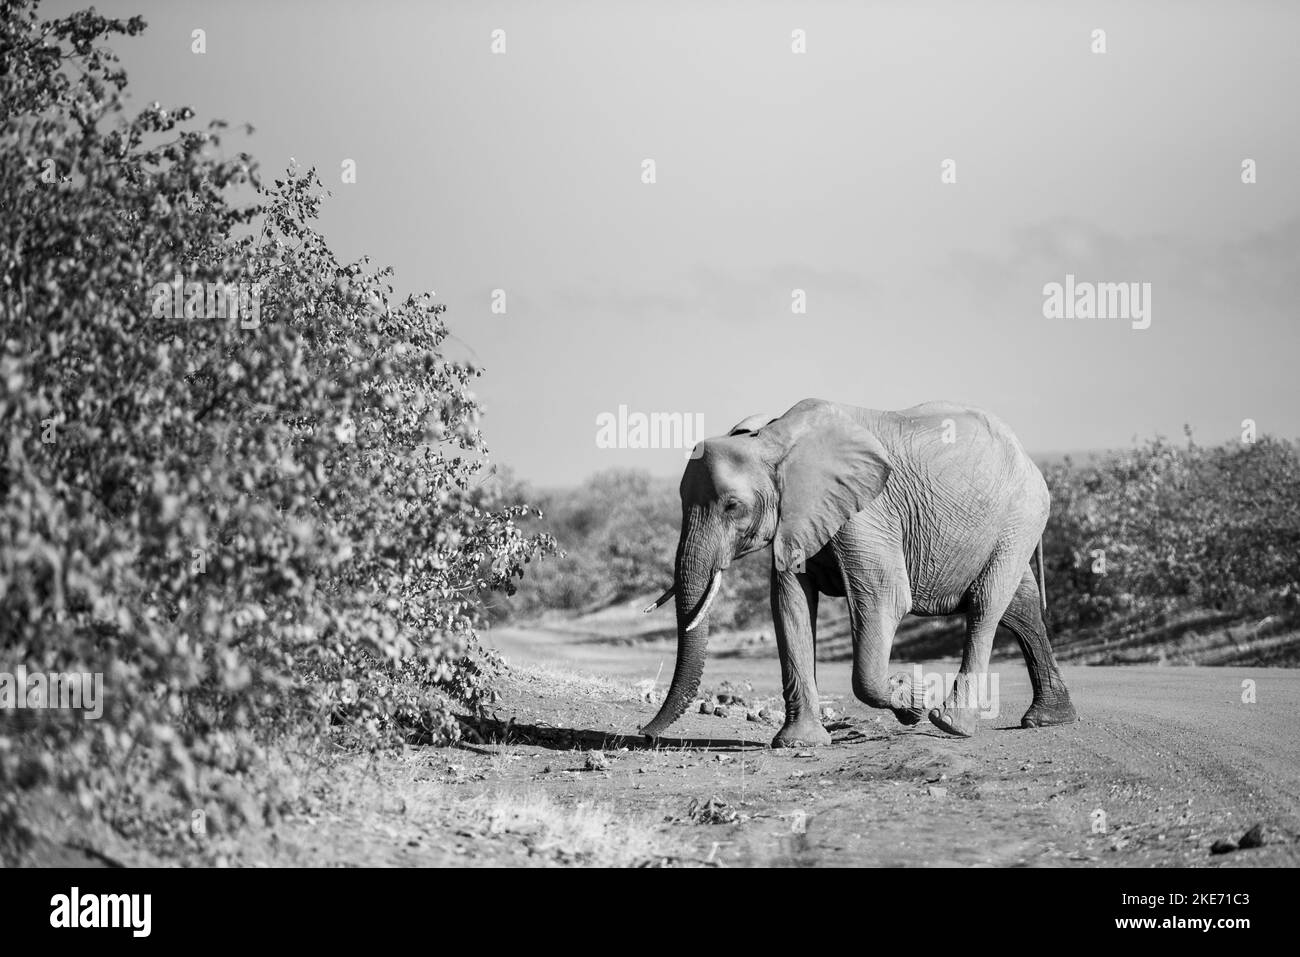 A black and white shot of a baby elephant walking in a safari on a sunny day Stock Photo